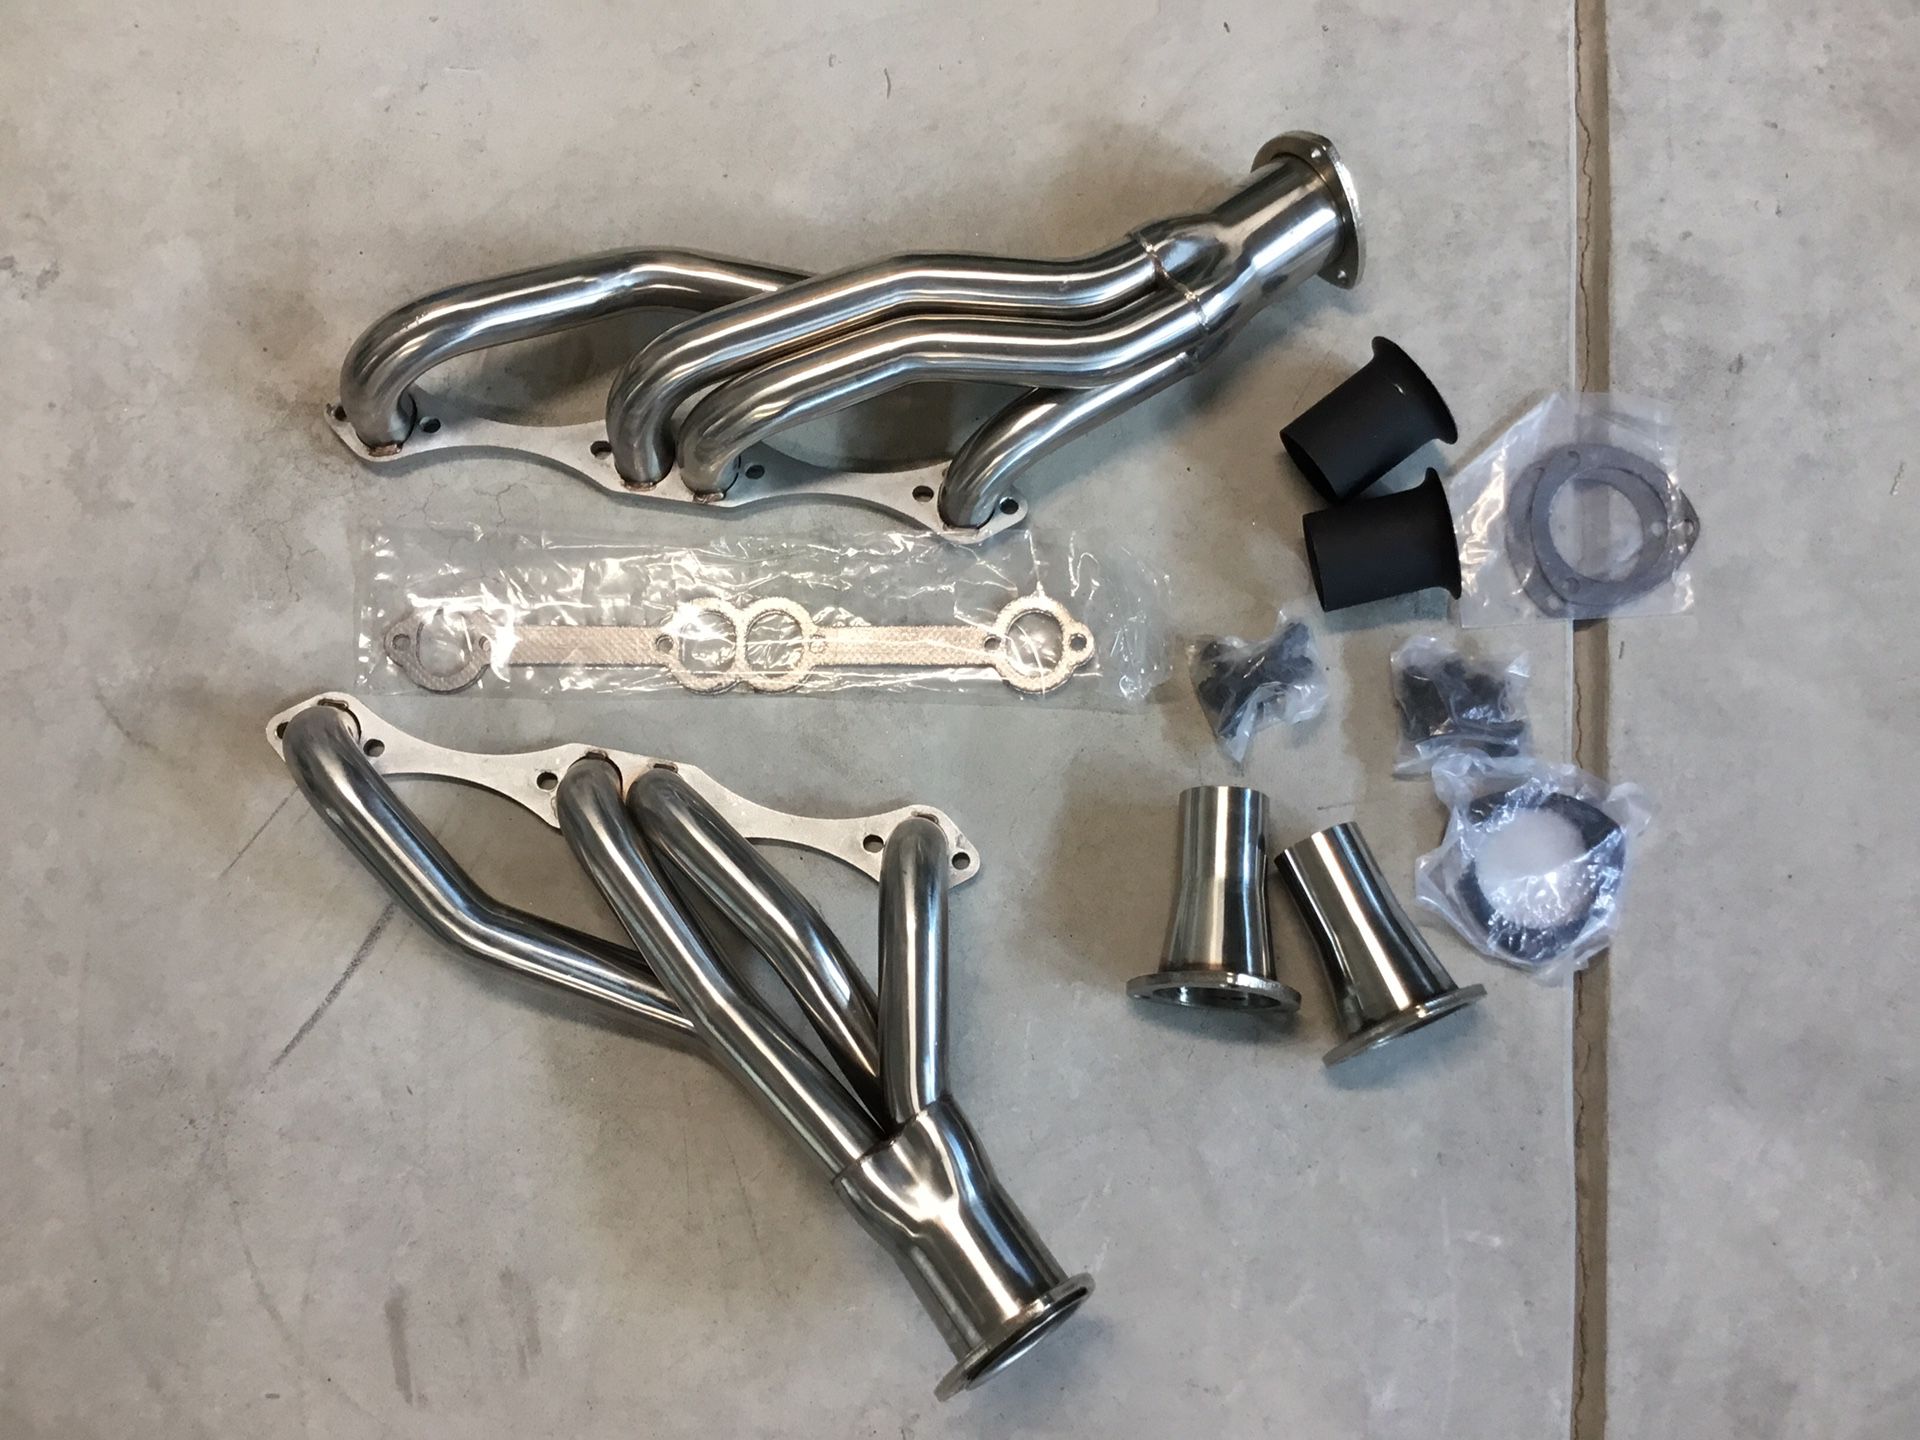 SBC Small Block Chevy Shorty Headers T-304 stainless steel material TIG welded CNC machined flange 